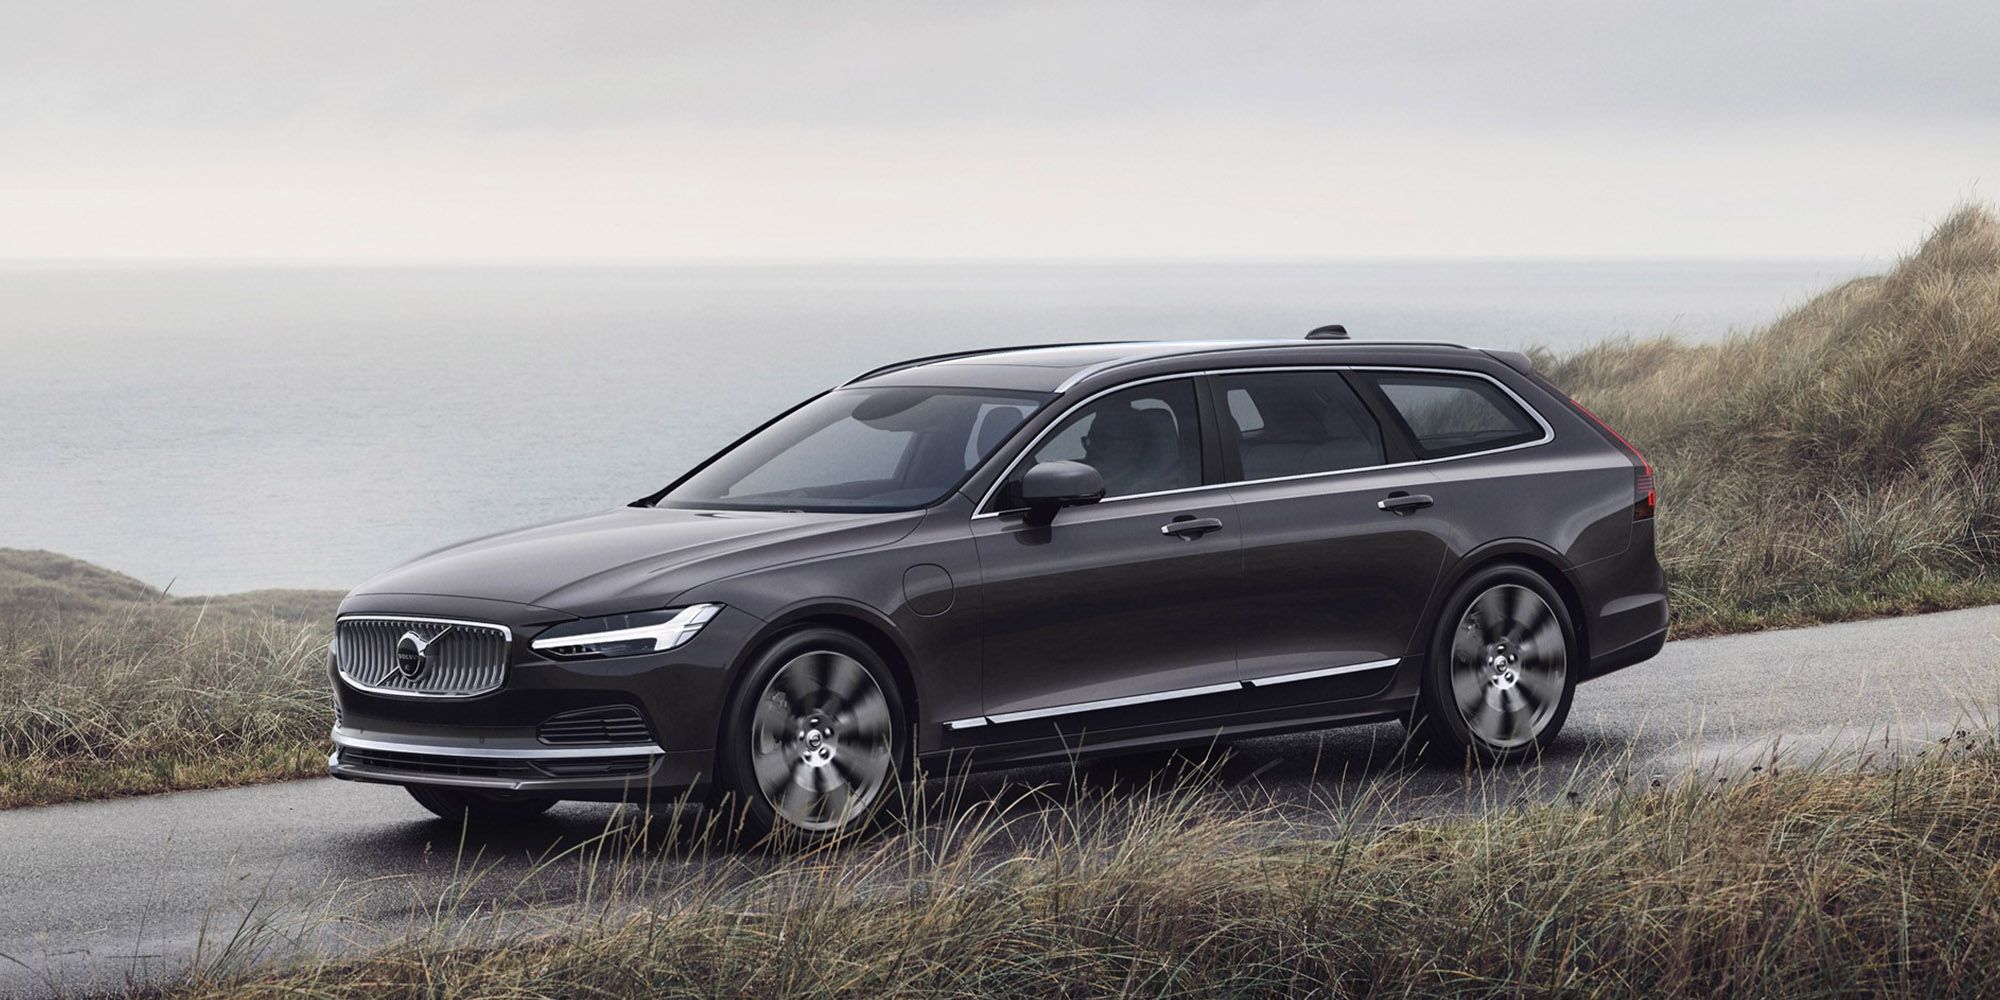 Front 3/4 view of the V90